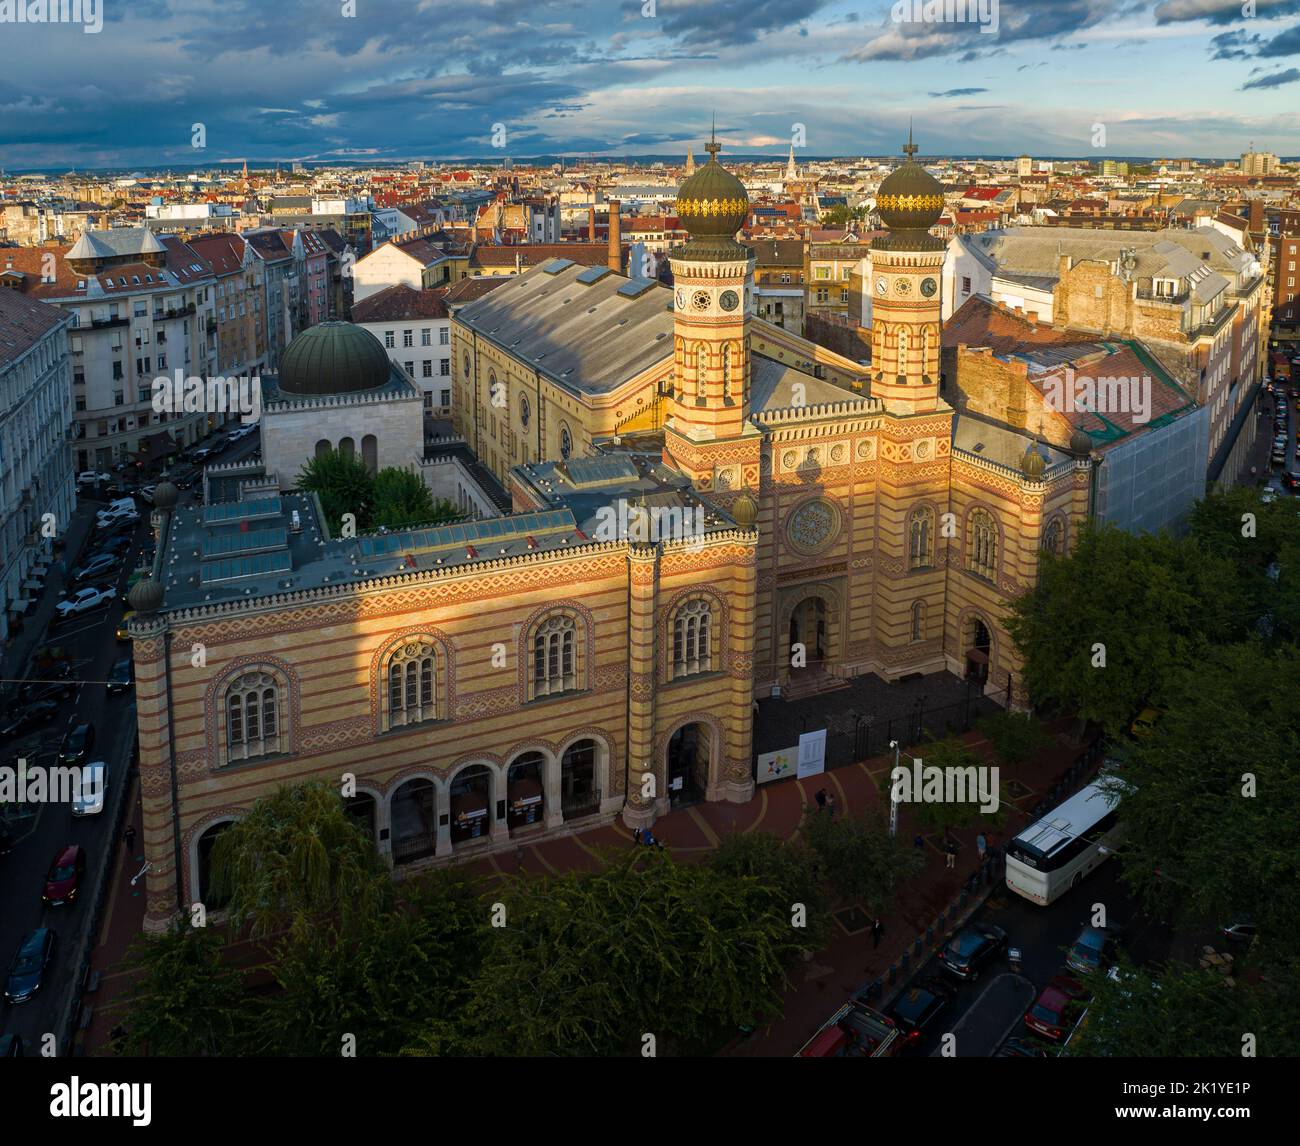 Budapest, Hungary. Dohany street Synagogue aerial view. This is an Jewish memorial center also known as the Great Synagogue or Tabakgasse Synagogue. I Stock Photo